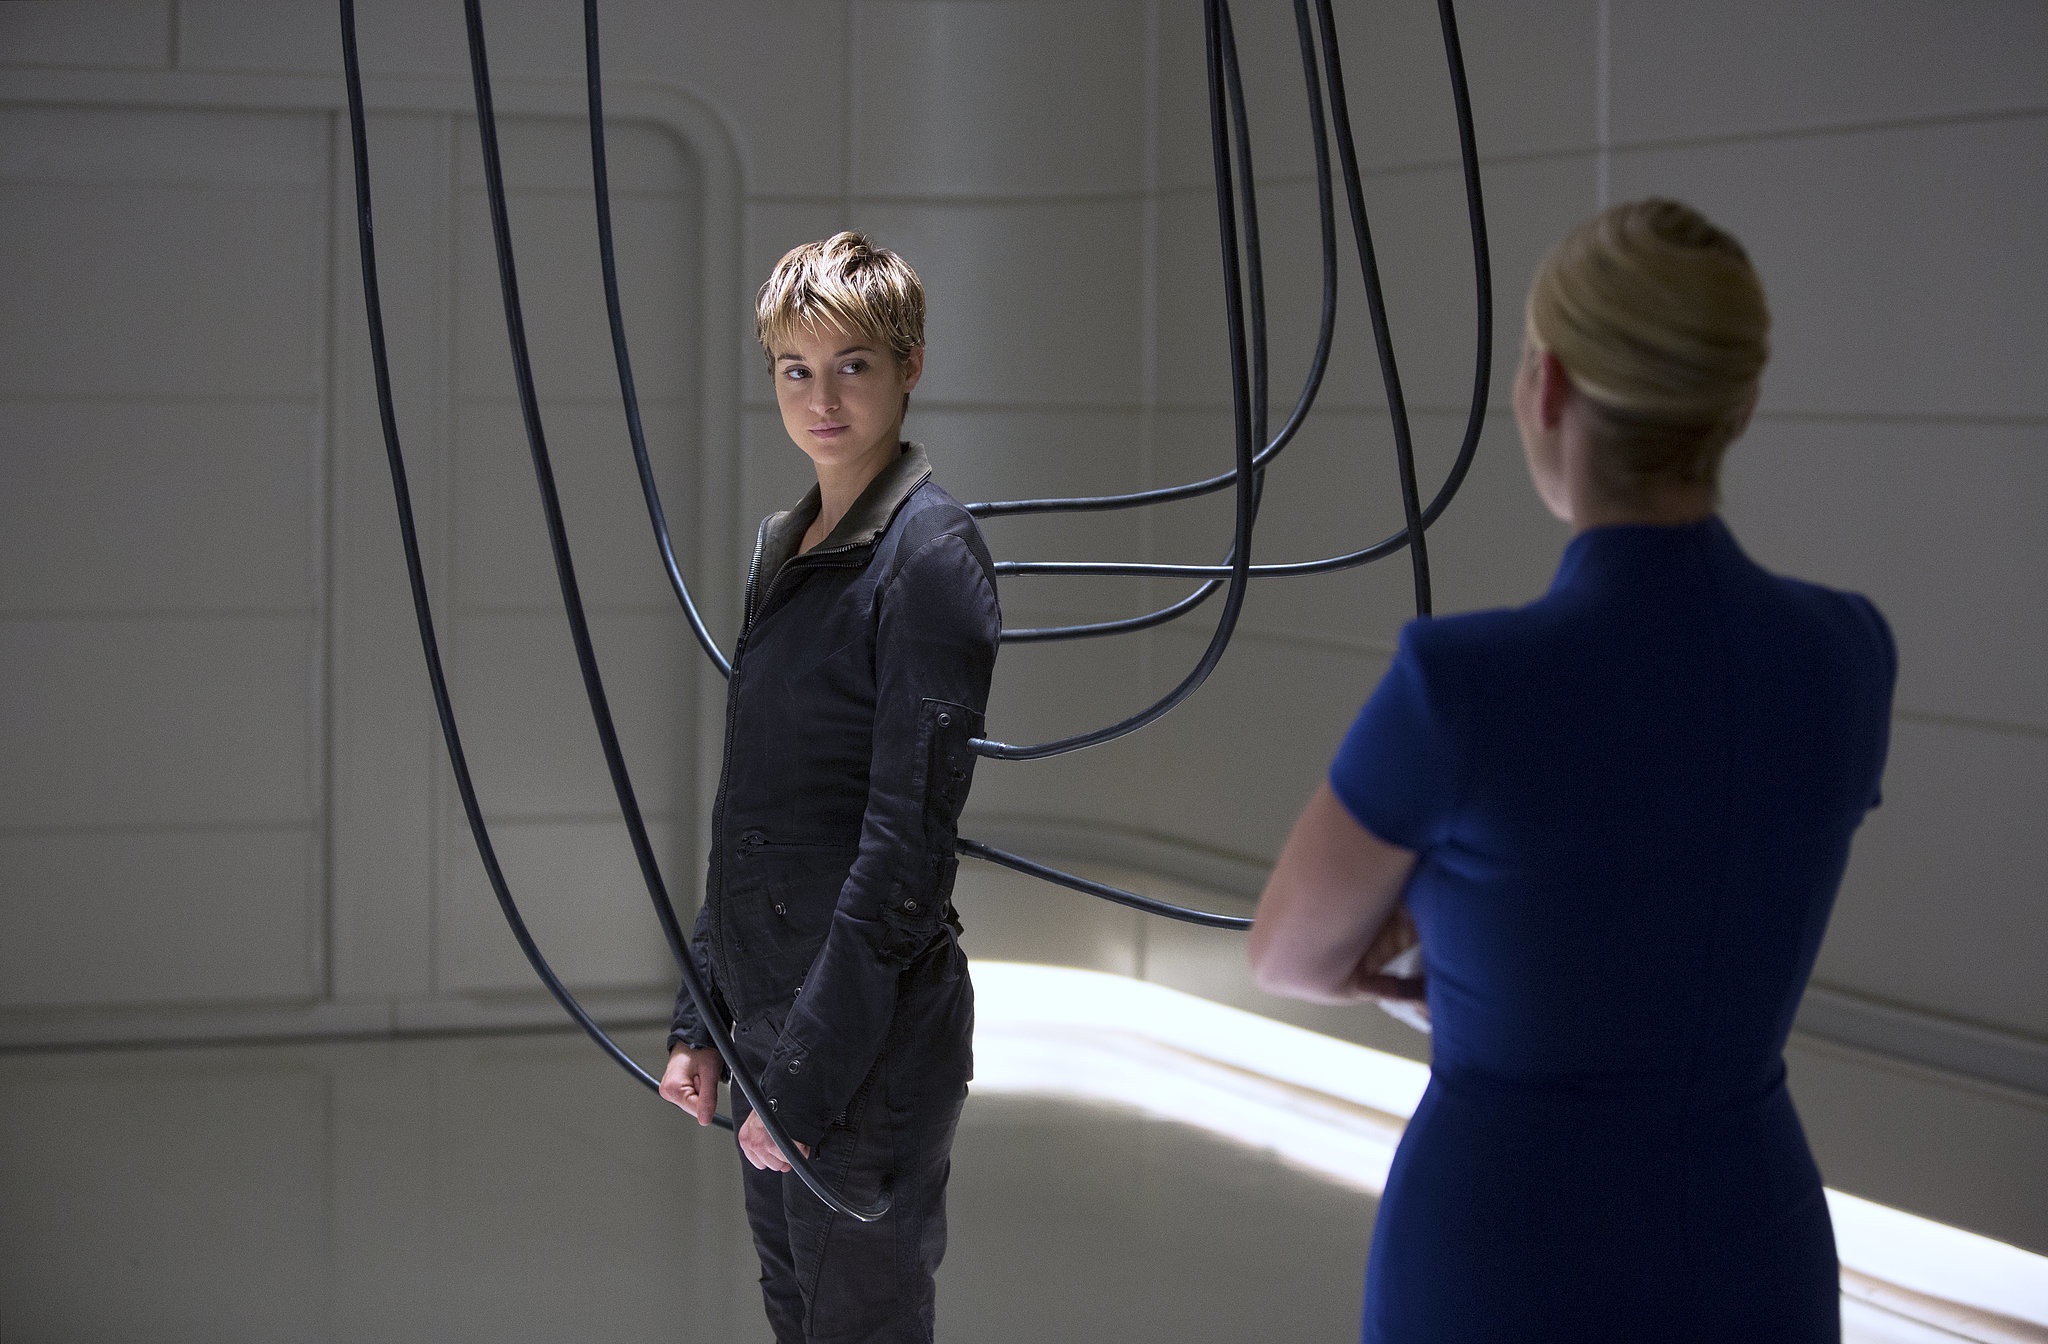 Shailene Woodley Talks About ‘Insurgent’ and Explains That Box With MTV